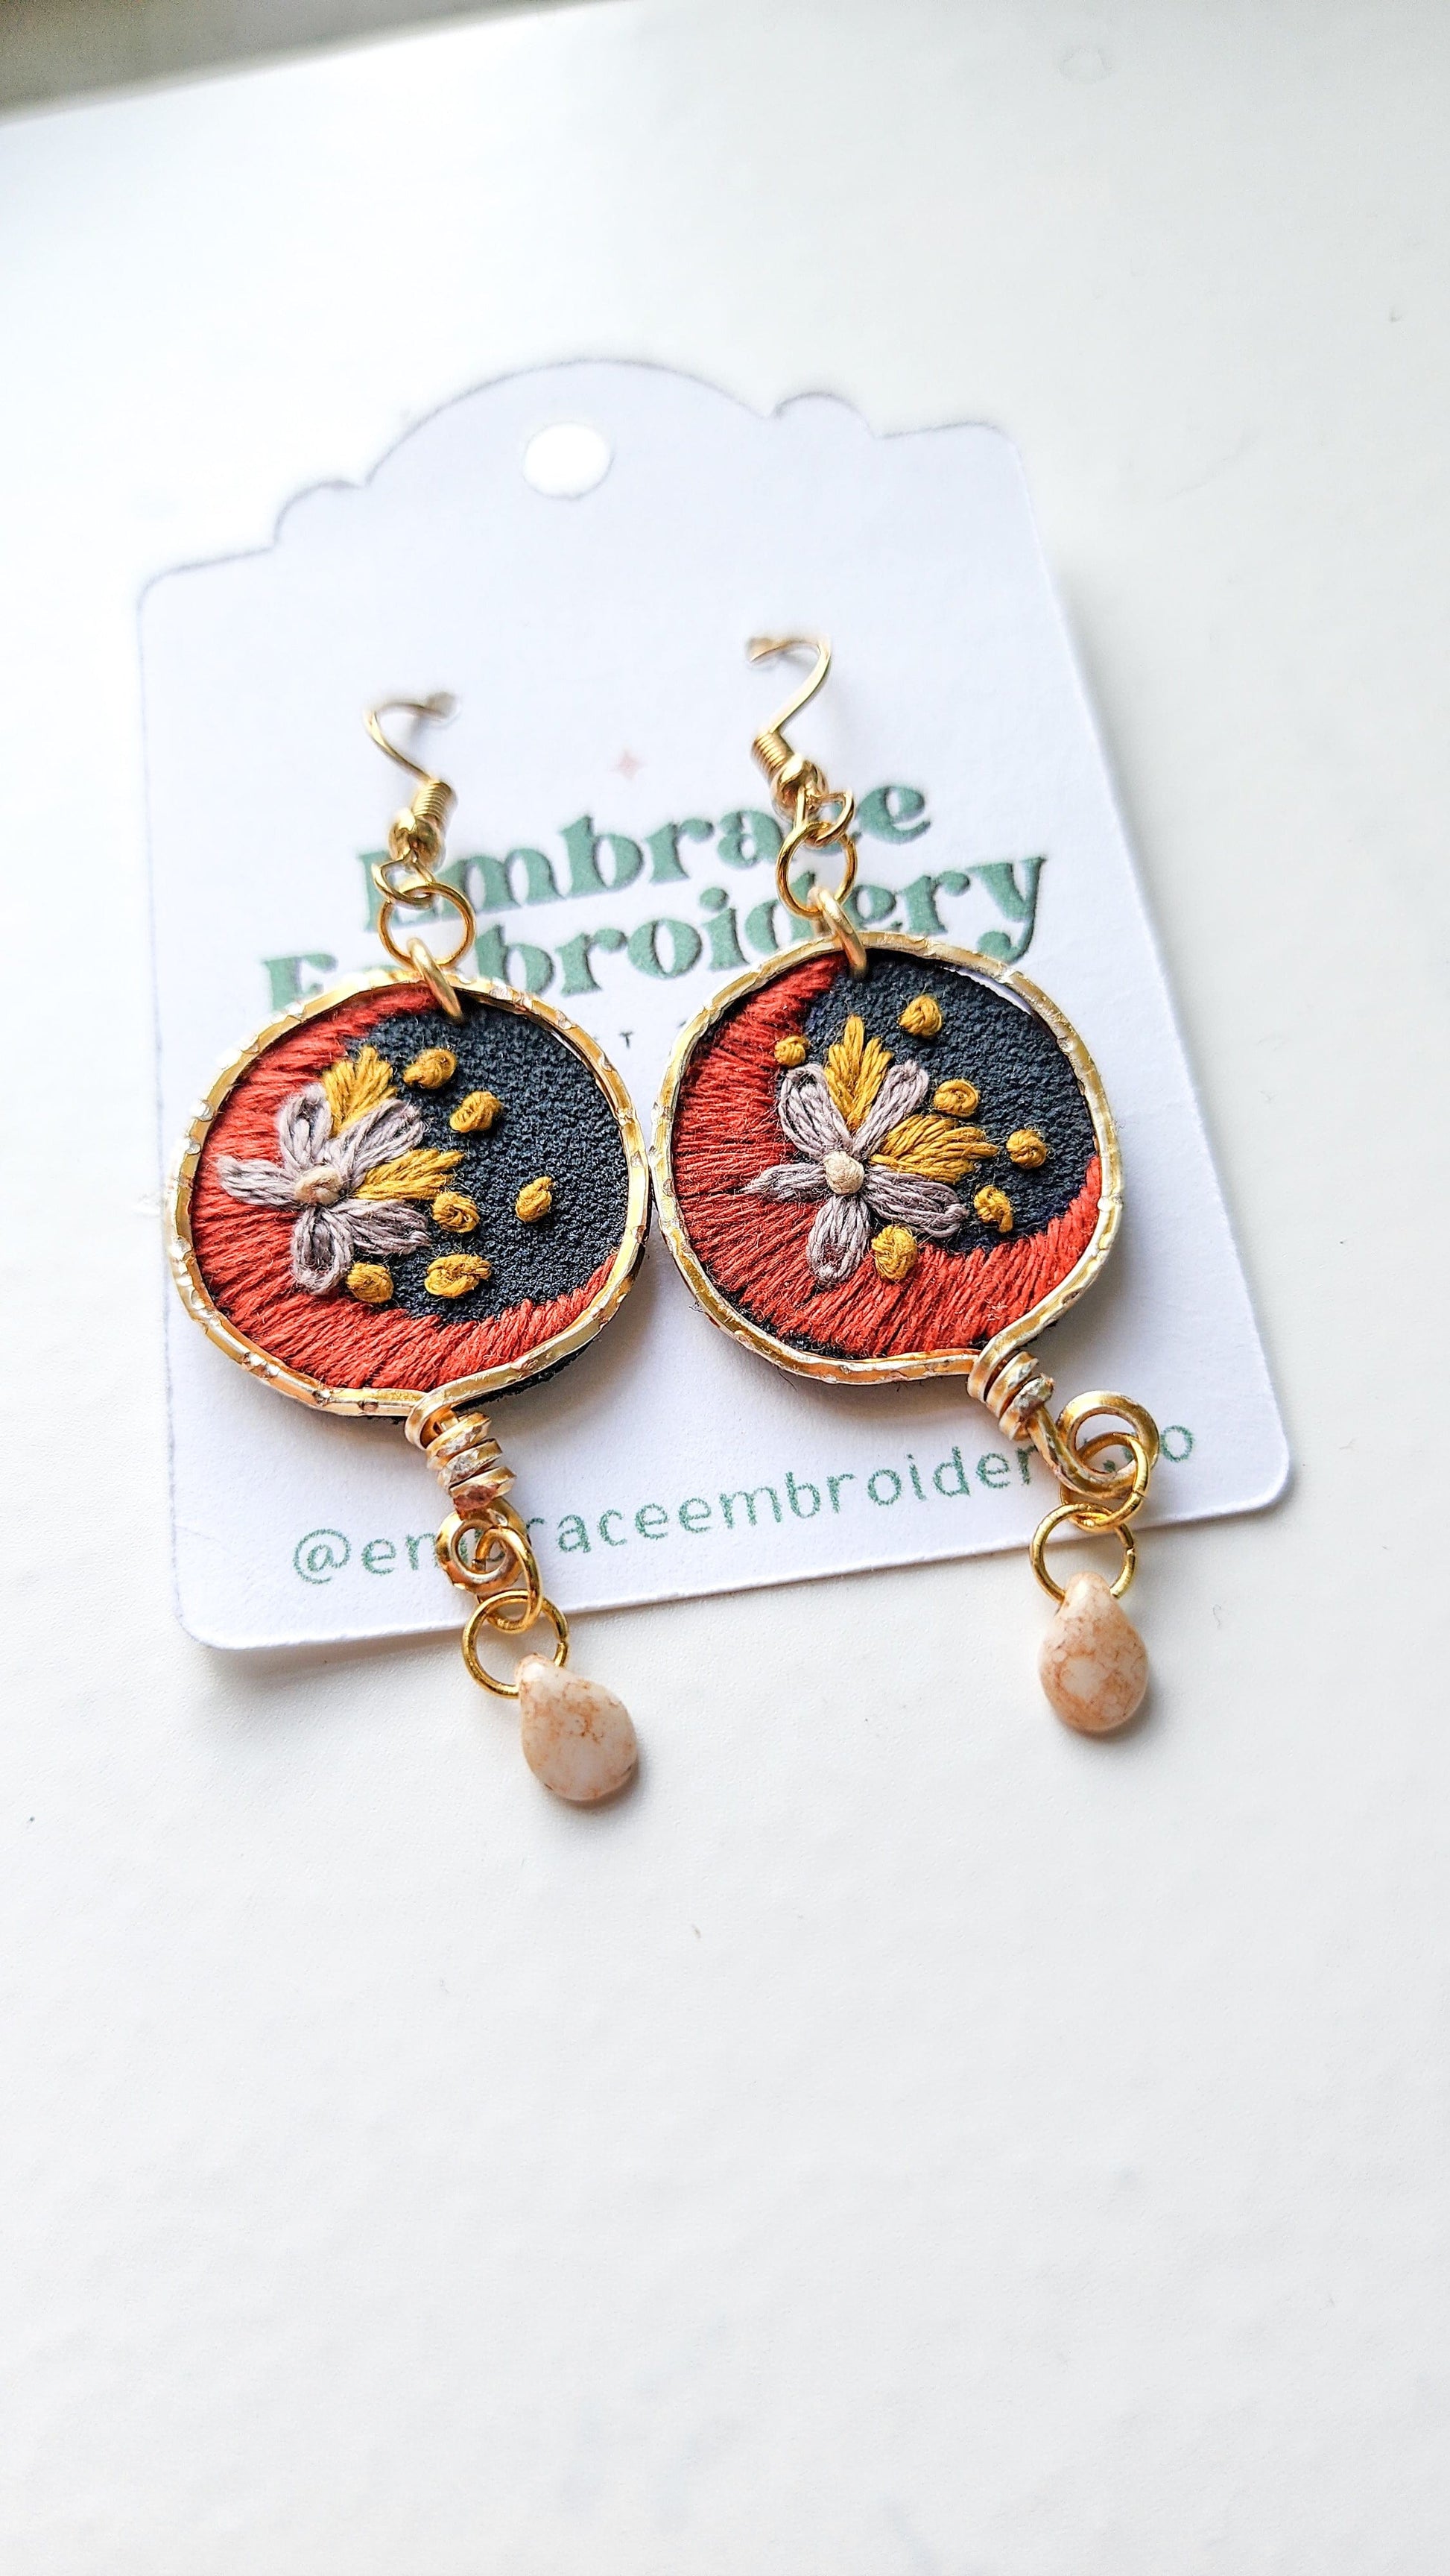 Embrace Embroidery Midnight Moon - Hand Embroidered Earrings- MADE TO ORDER